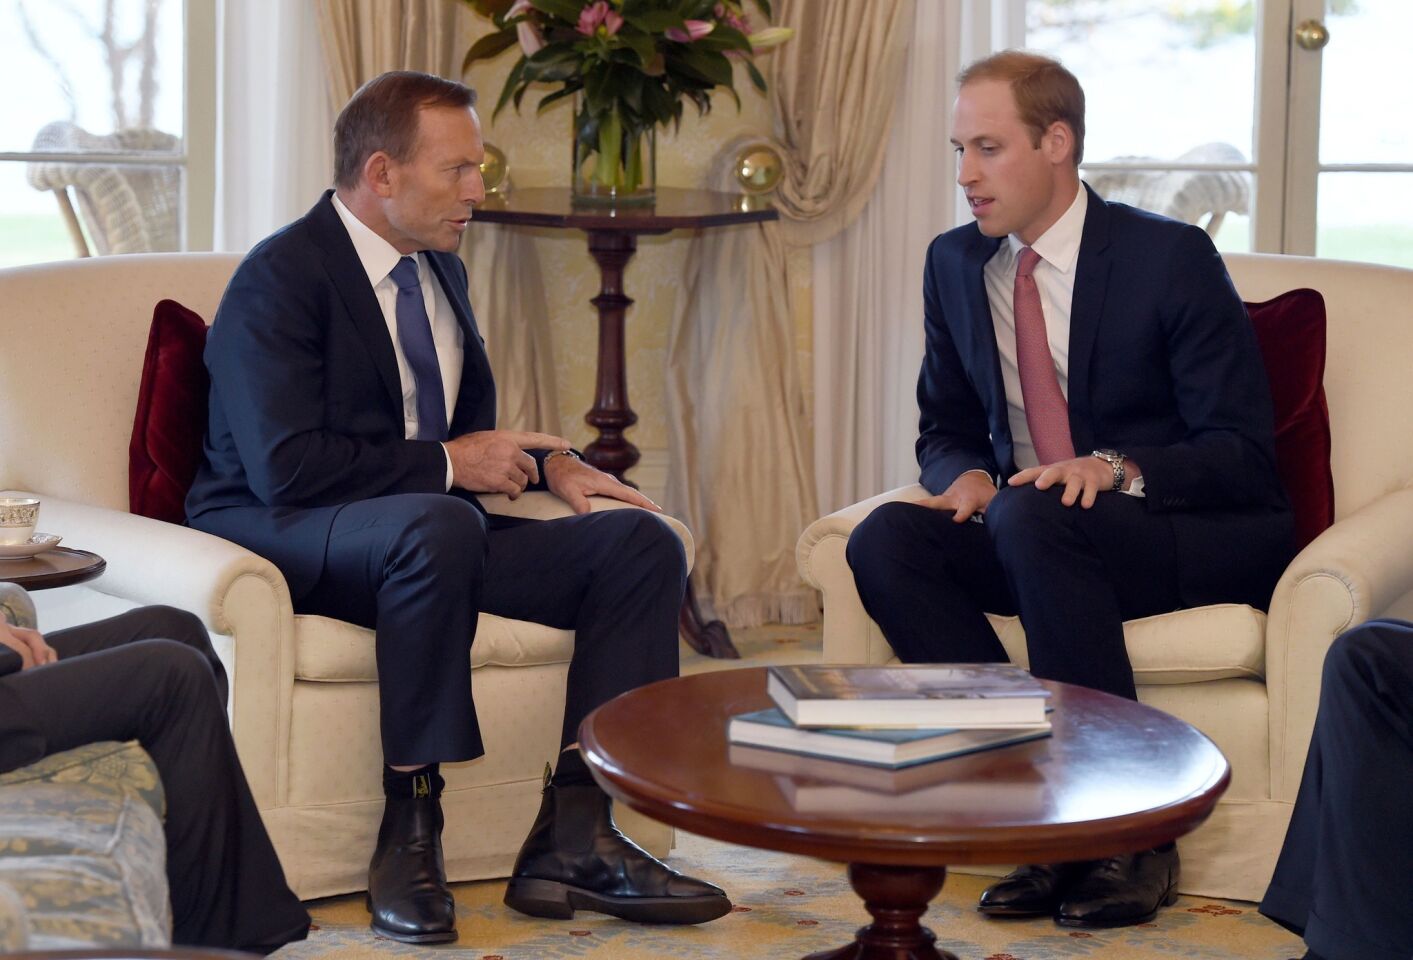 Prince William meets with Australian Prime Minister Tony Abbott at Admiralty House in Sydney on Thursday, April 17, 2014.